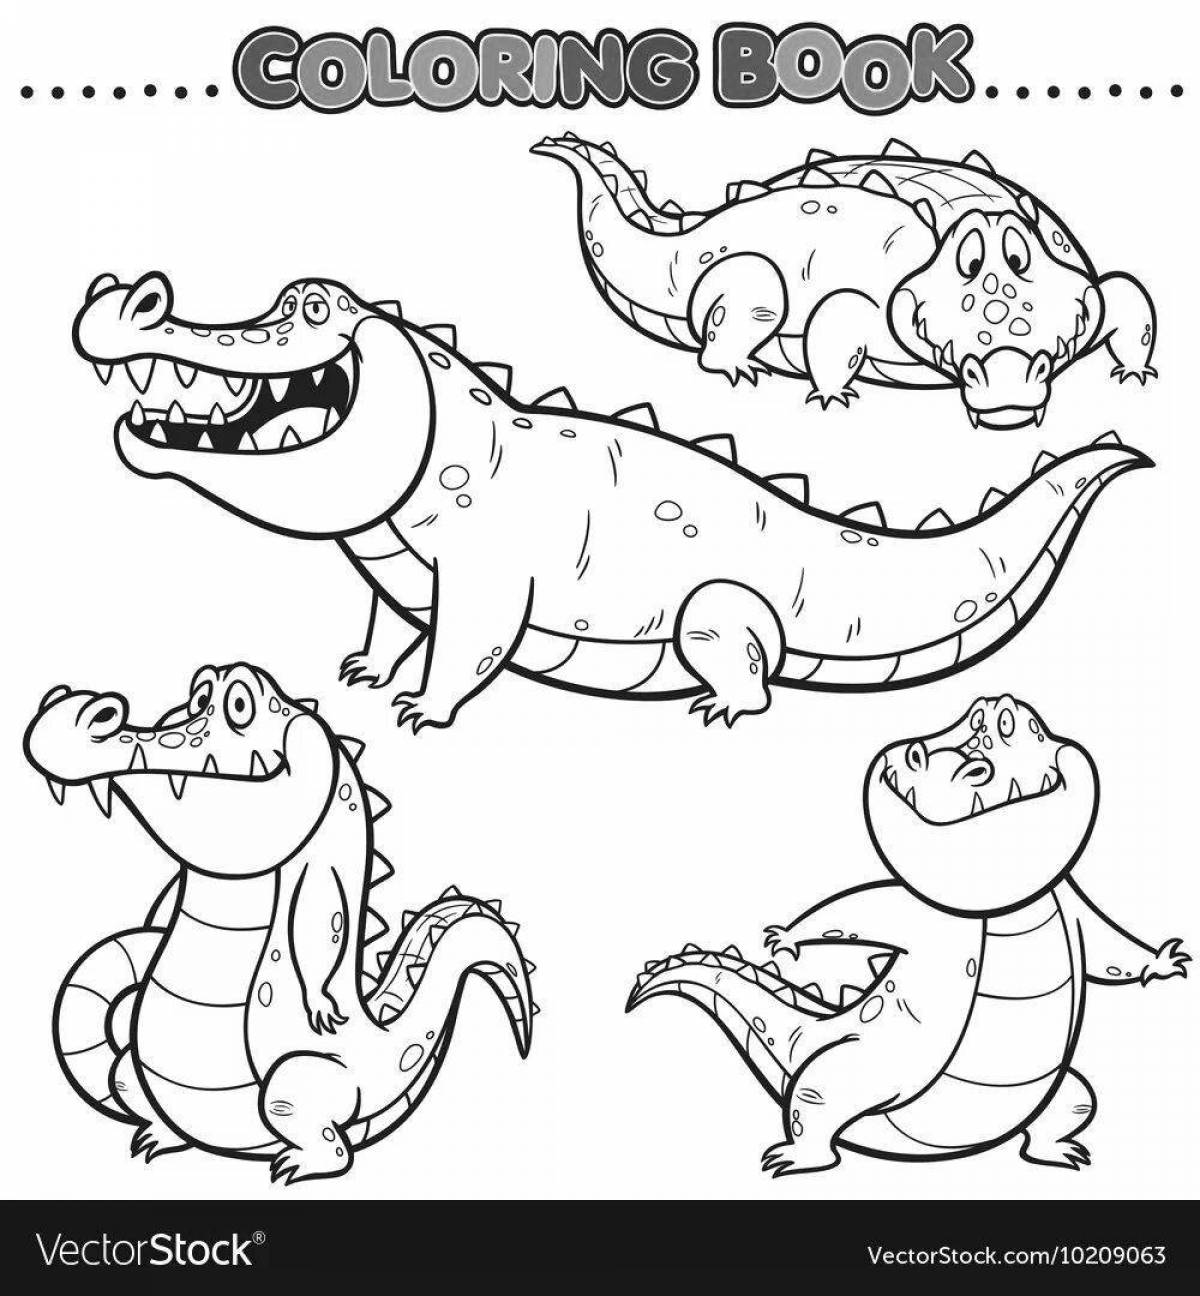 Fun coloring crocodile for children 4-5 years old